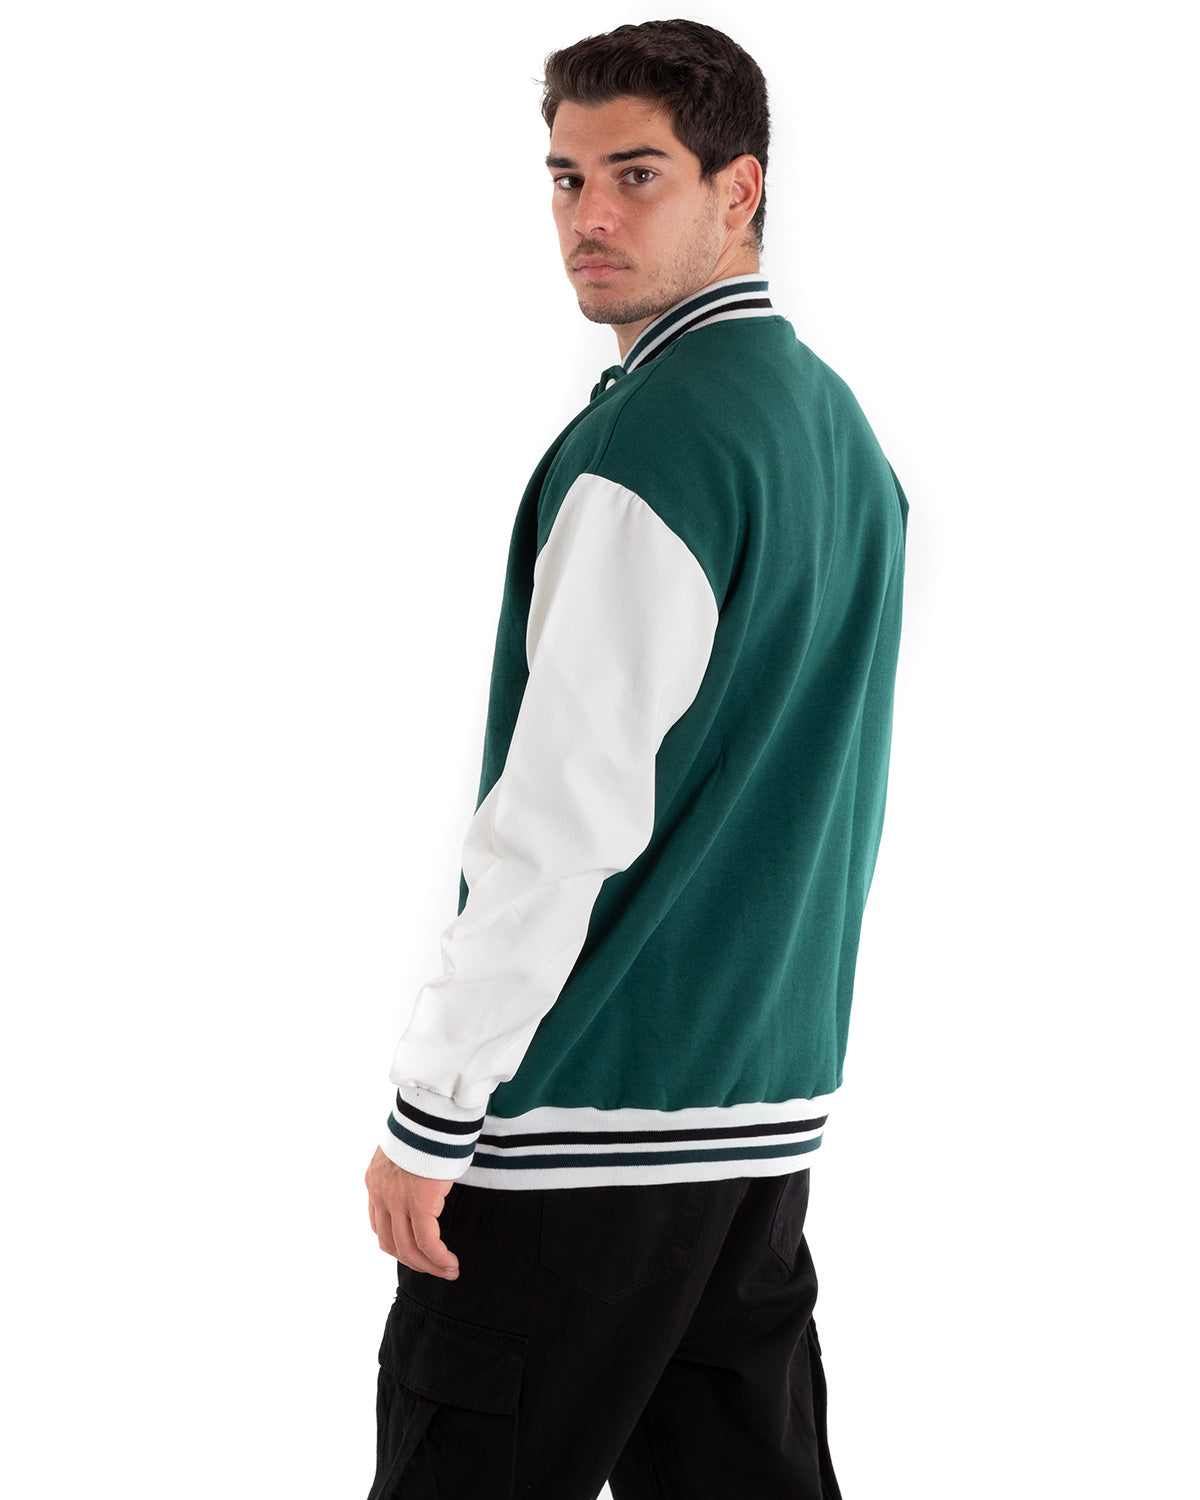 Men's College Varsity Jacket with Faux Leather Sleeves Two-Tone Green White GIOSAL